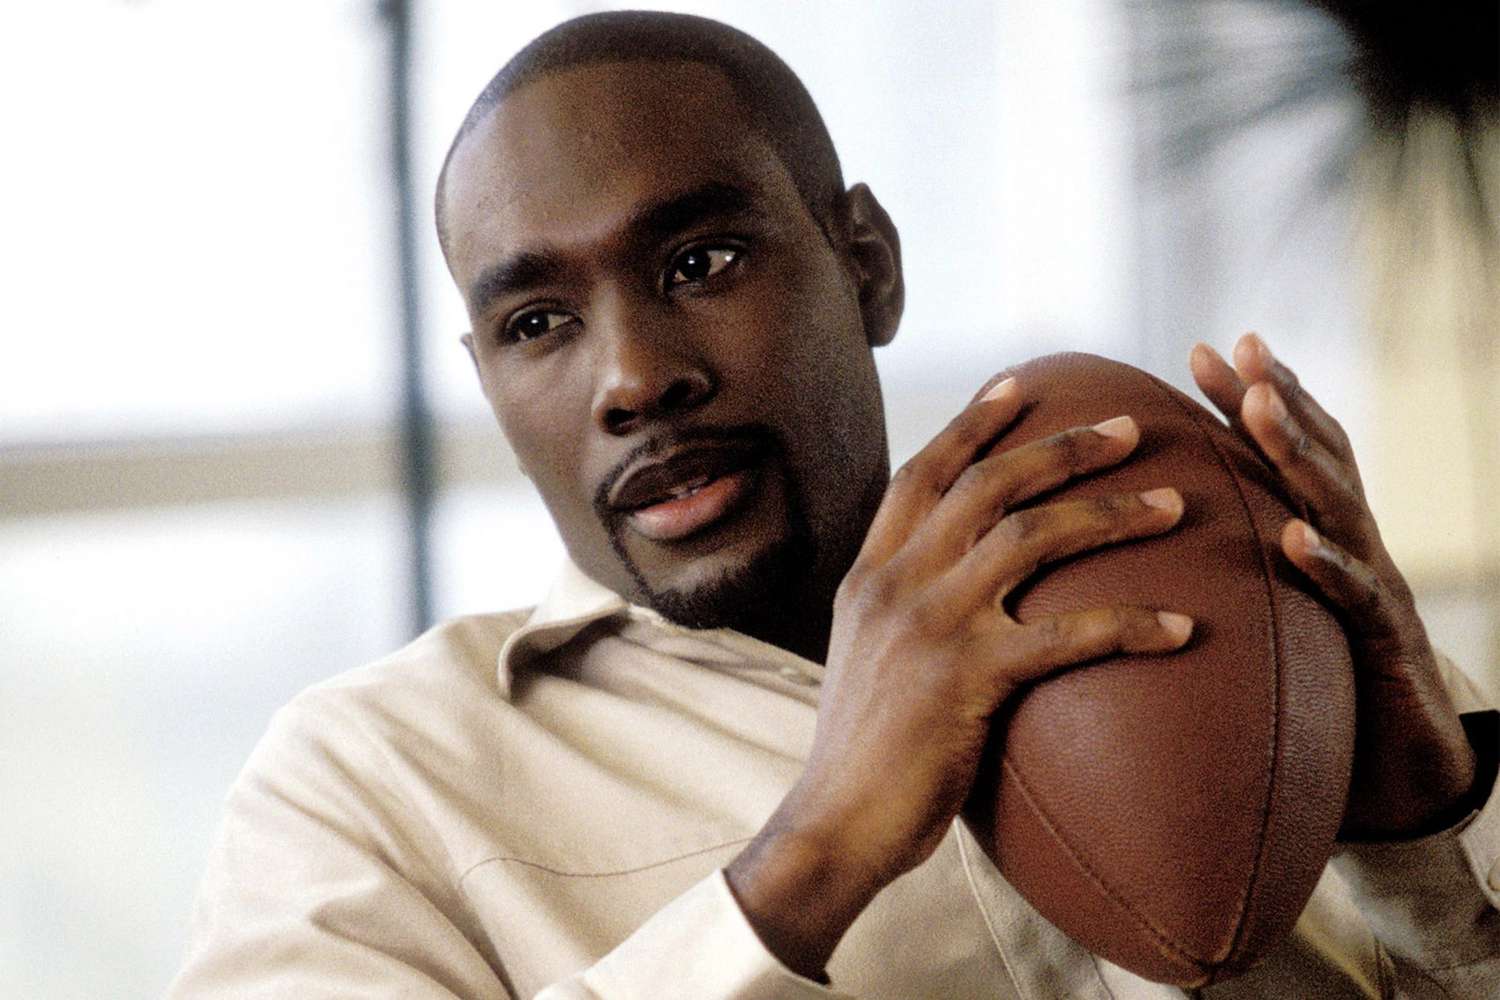 Morris Chestnut on his movies: From Boyz n the Hood to The Best Man